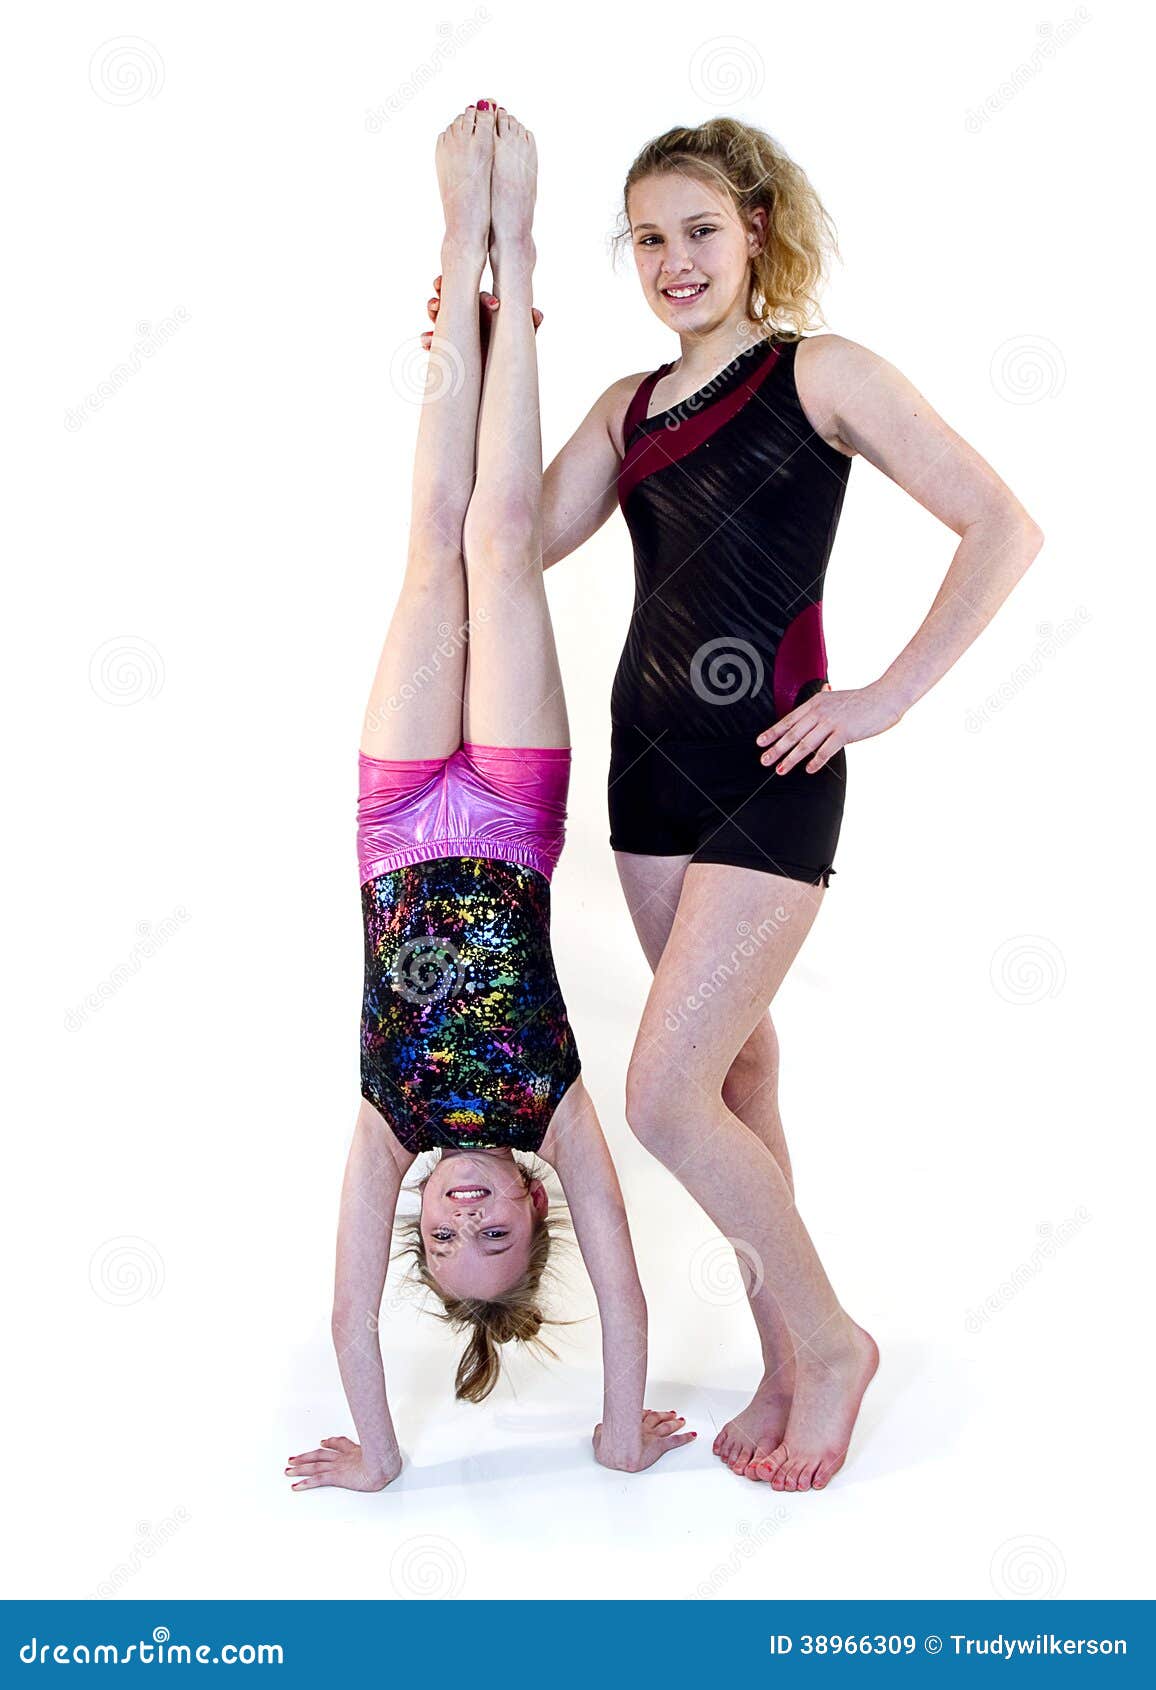 10 Year Old Caucasian Girl In Gymnastics Poses Stock Photo, Picture and  Royalty Free Image. Image 656546.